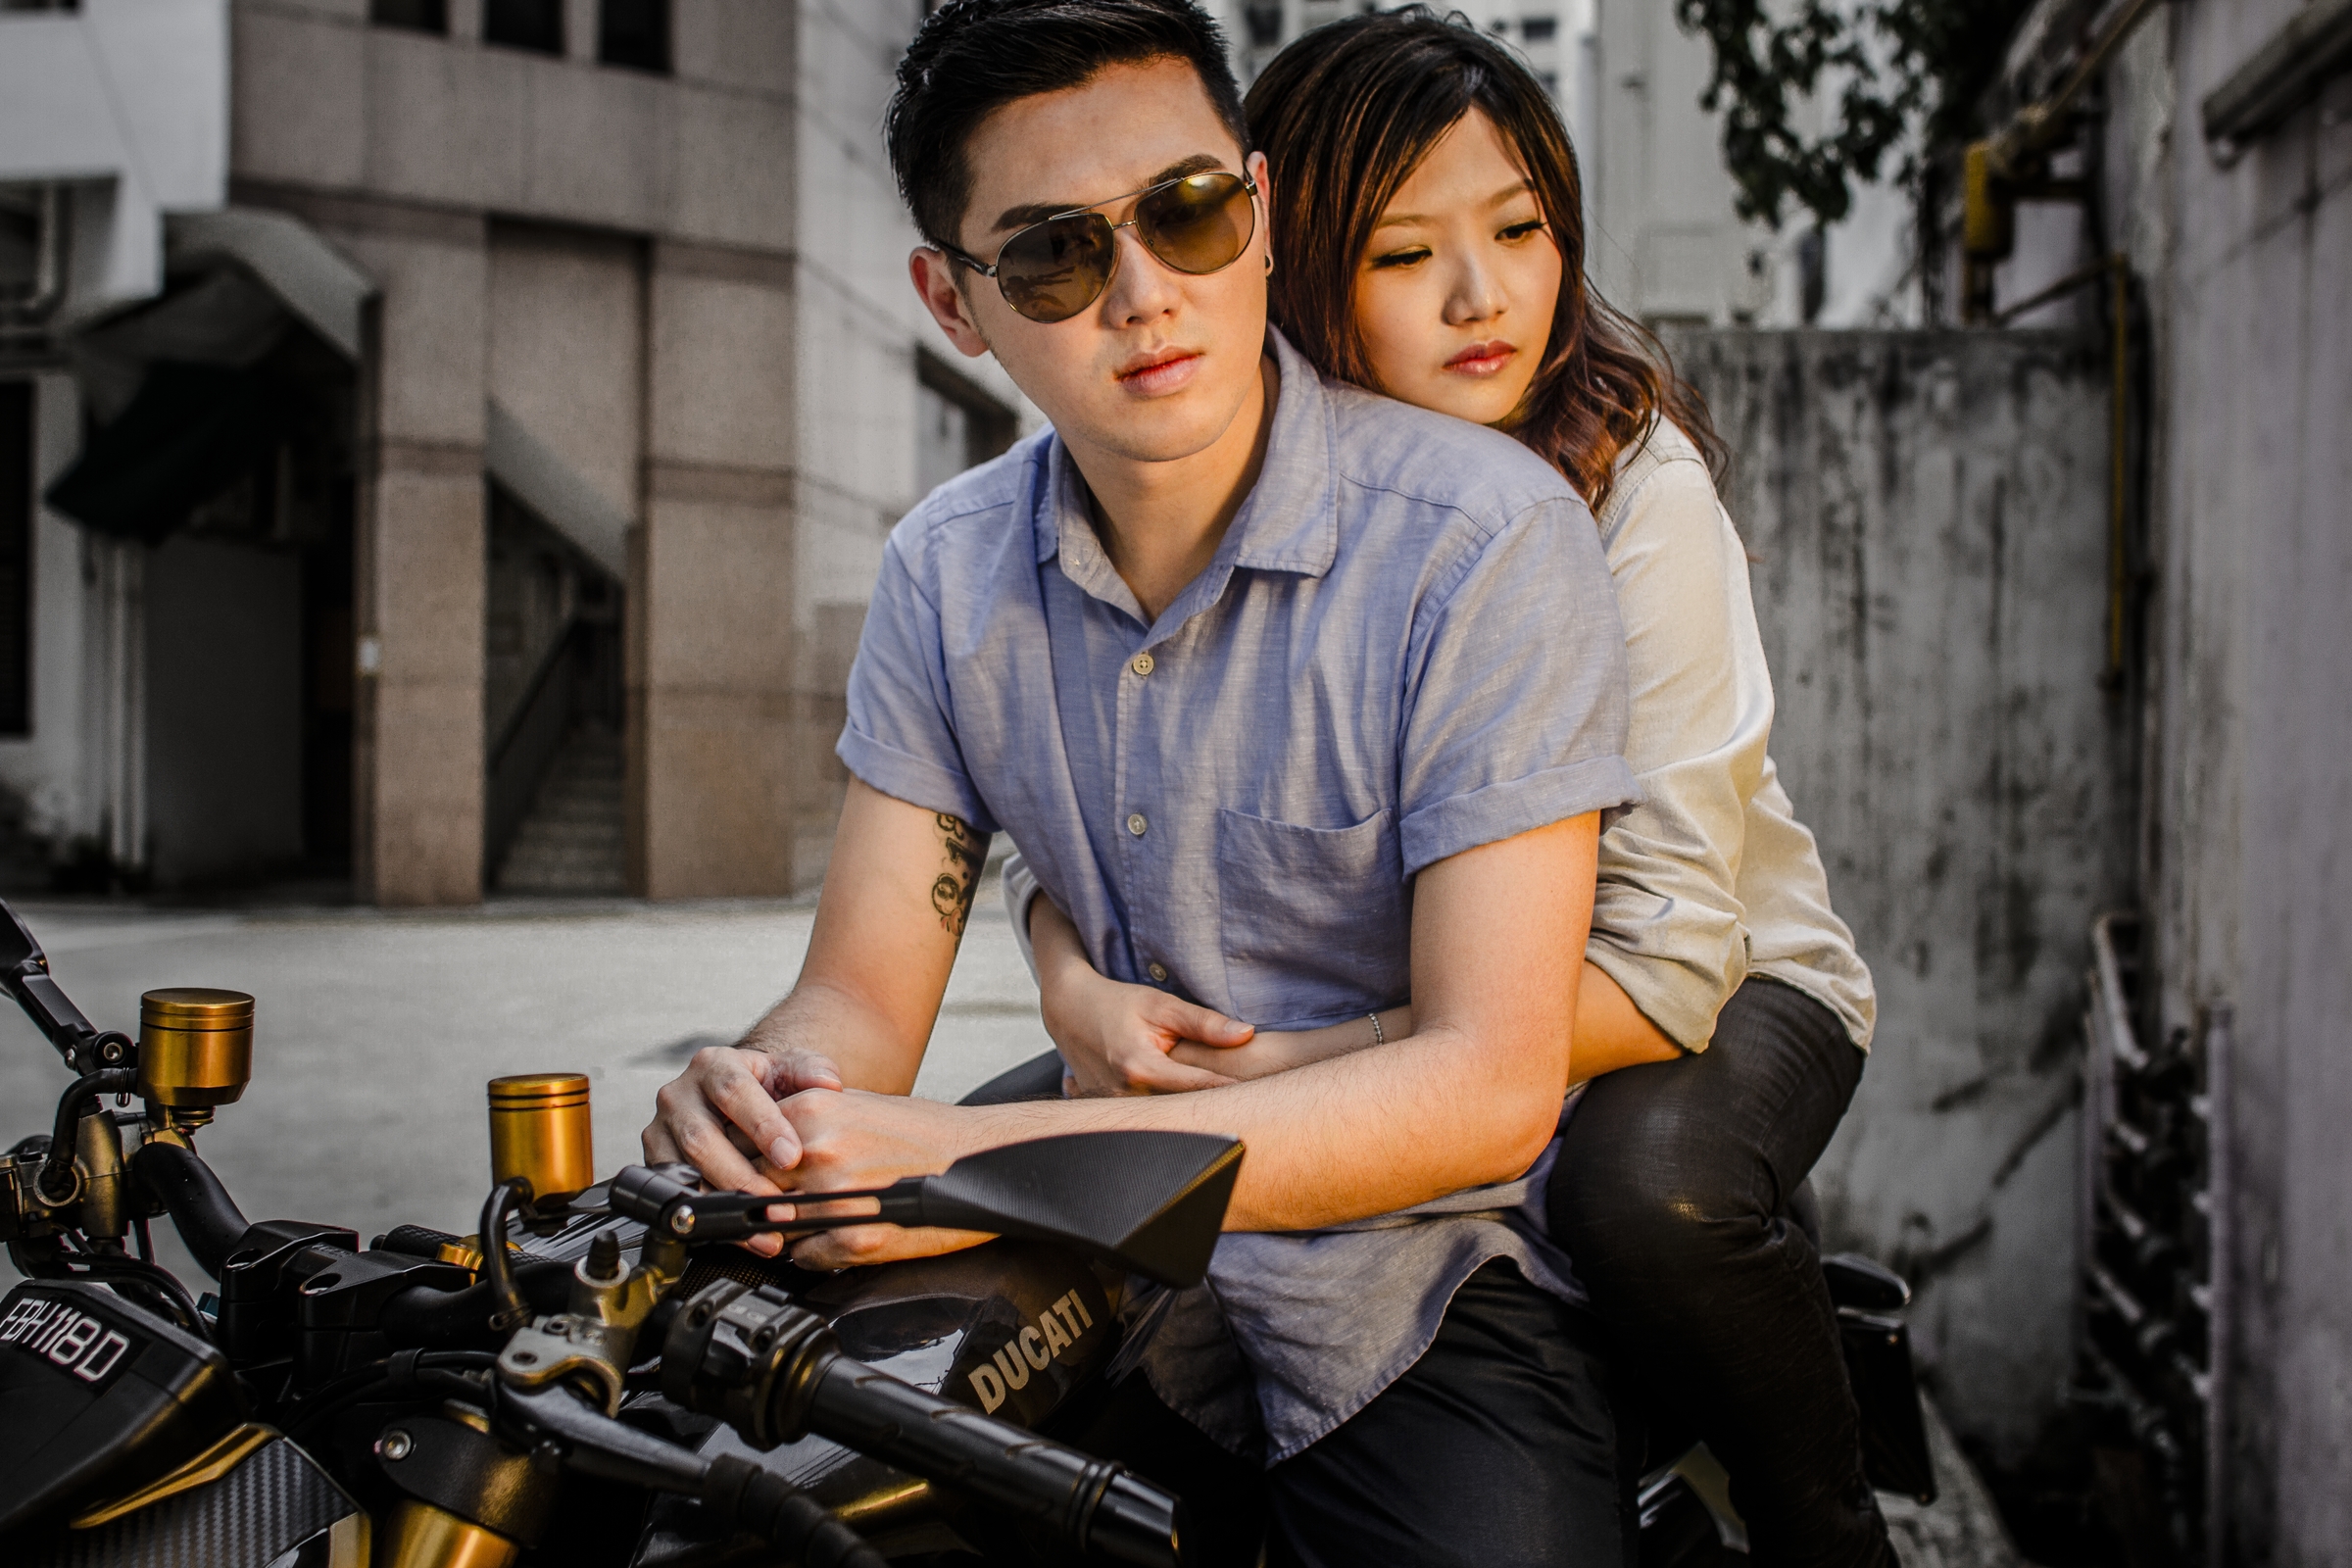 In this creative Hong Kong TVB drama inspired wedding shoot - Among the raw and gritty streets of Asia, there are Triads Gangsters, Tattoos,&nbsp;and Motorcycle&nbsp;Chases; all to woo a girl. 